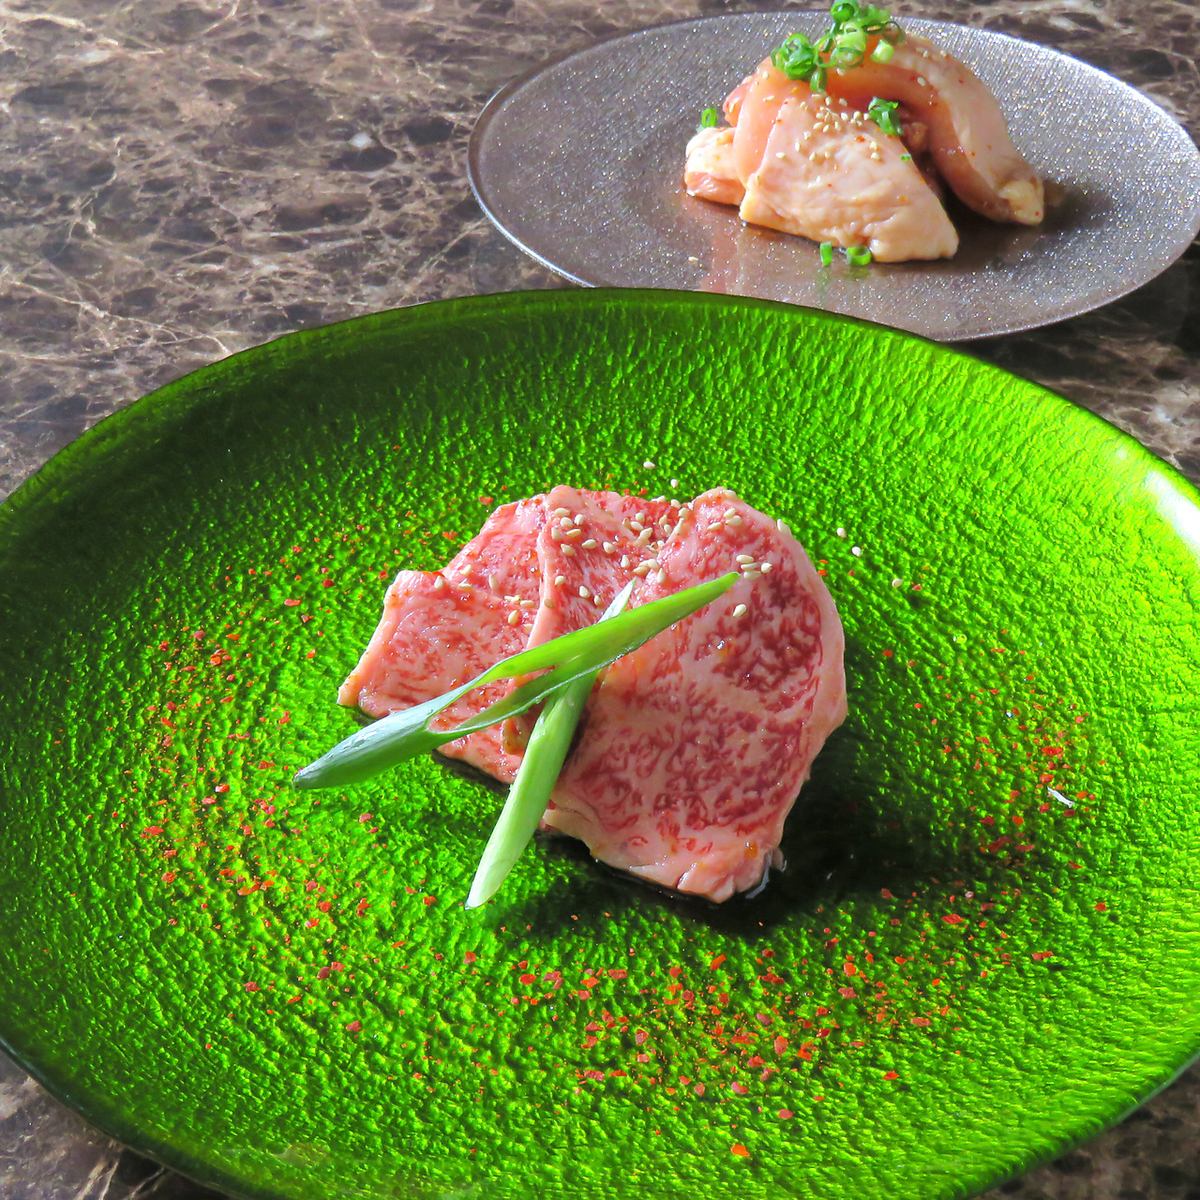 How about an adult date with high-quality Japanese beef yakiniku?